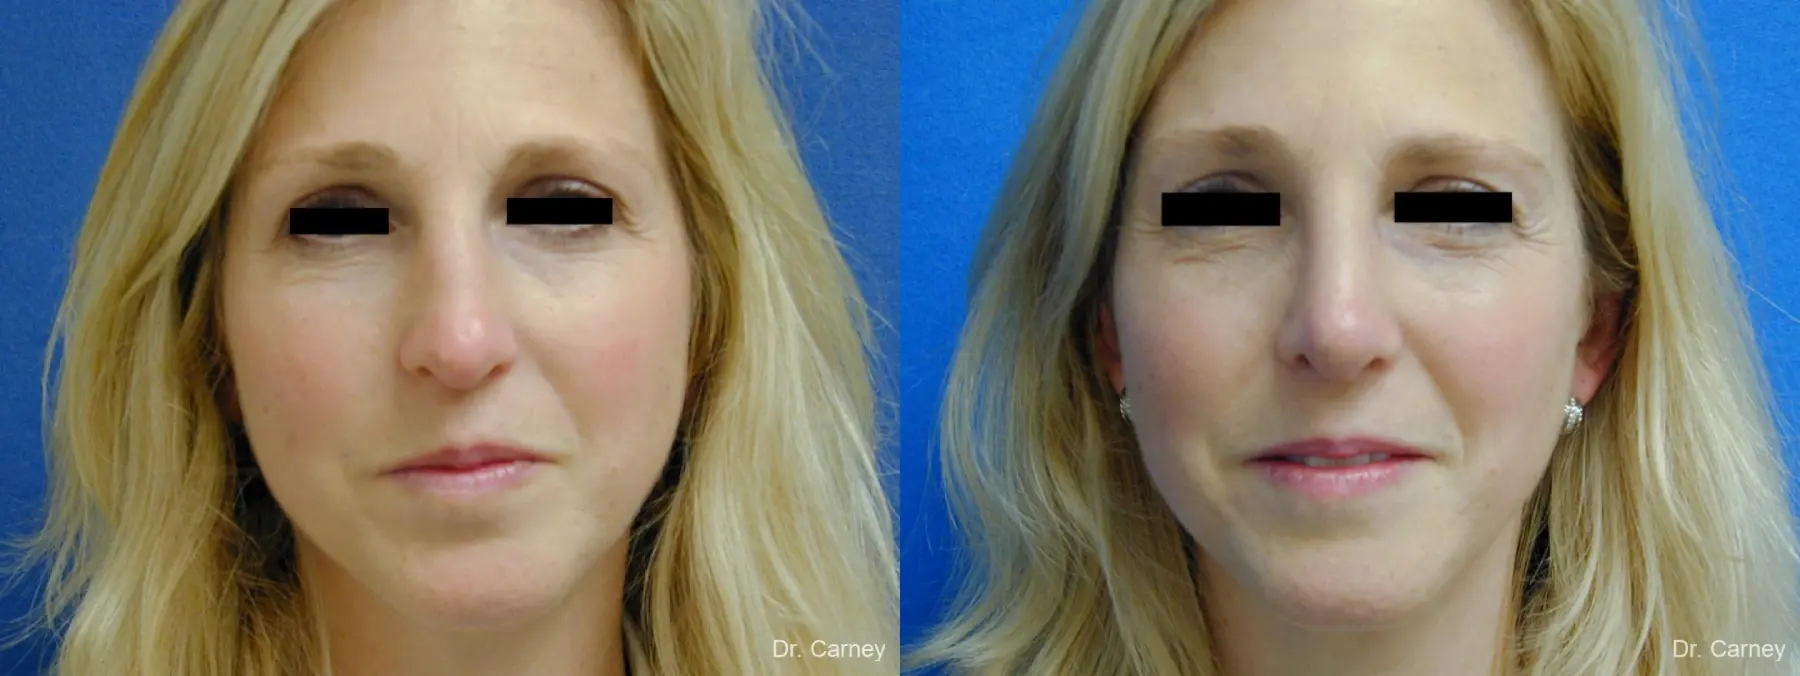 Virginia Beach Rhinoplasty 1343 - Before and After